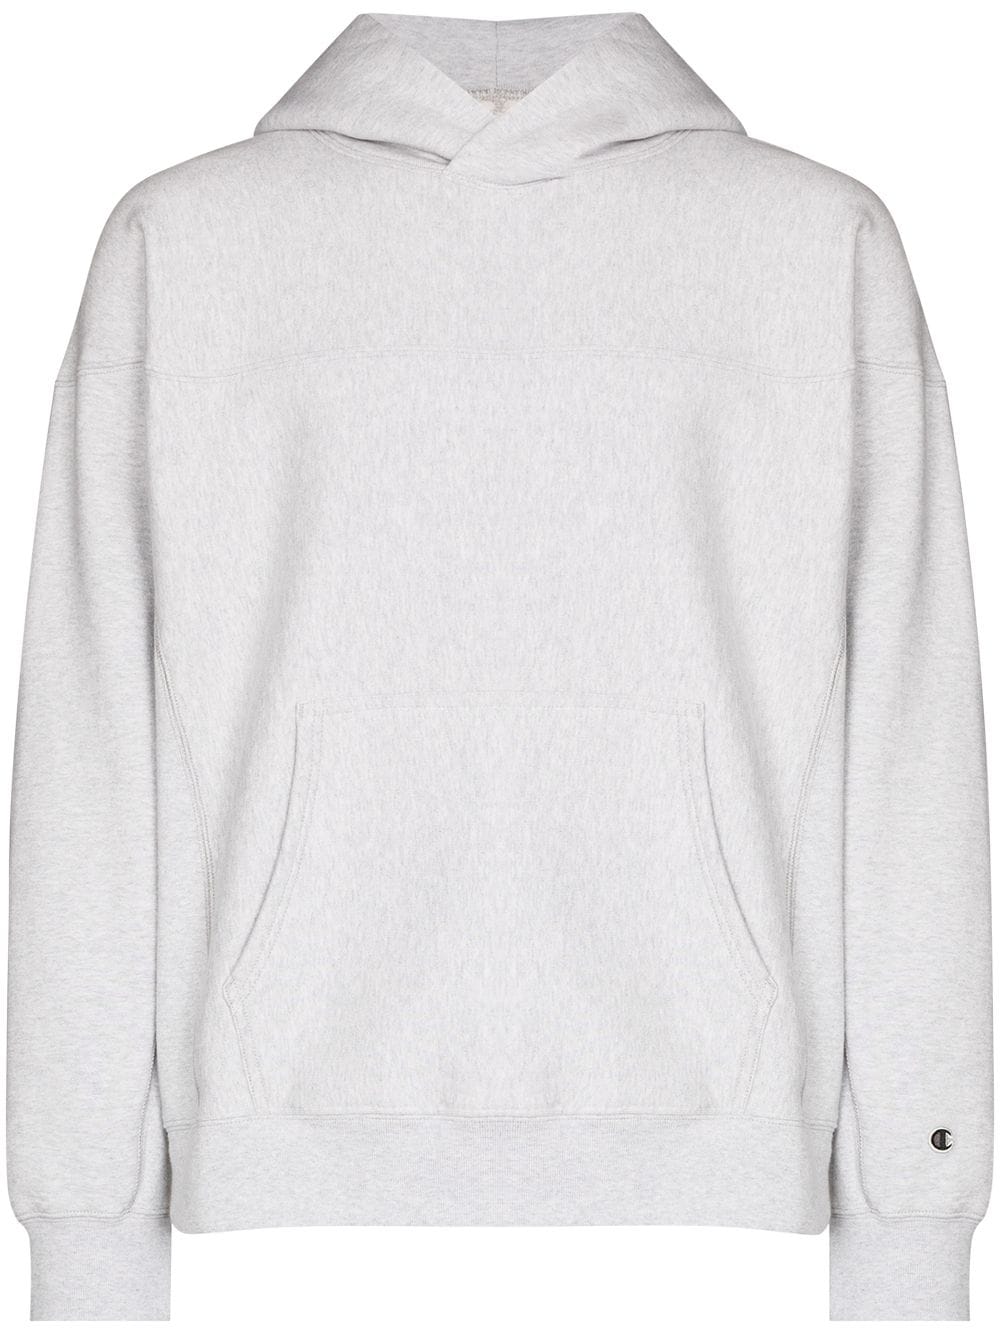 The Best Sweatshirts for Layering in Cold Weather, by Davidjamez